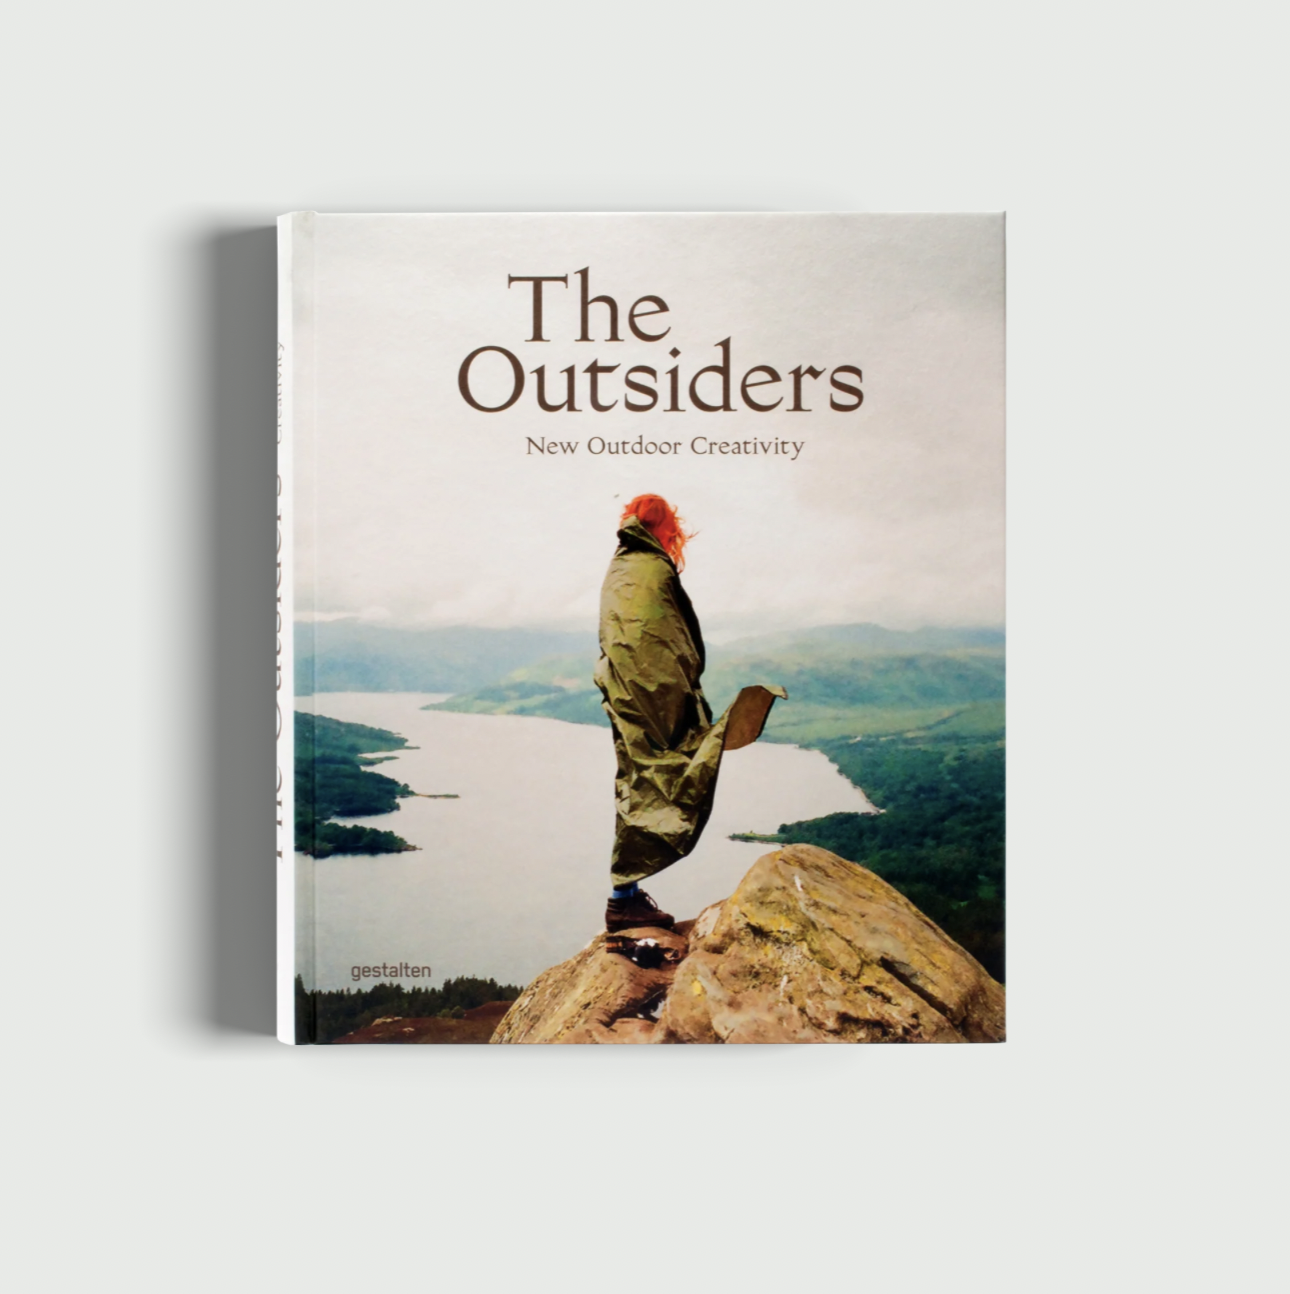 The outsiders - NEW OUTDOOR CREATIVITY